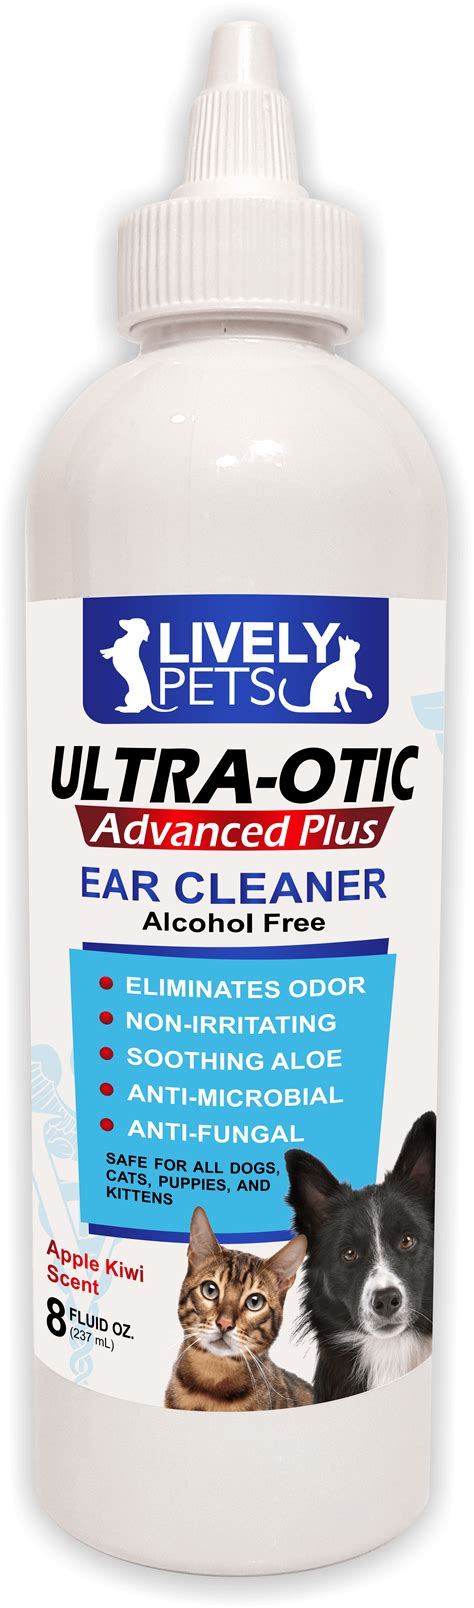 Lively Pets Ultra Otic Advanced Plus Ear Cleaner Ear Infection